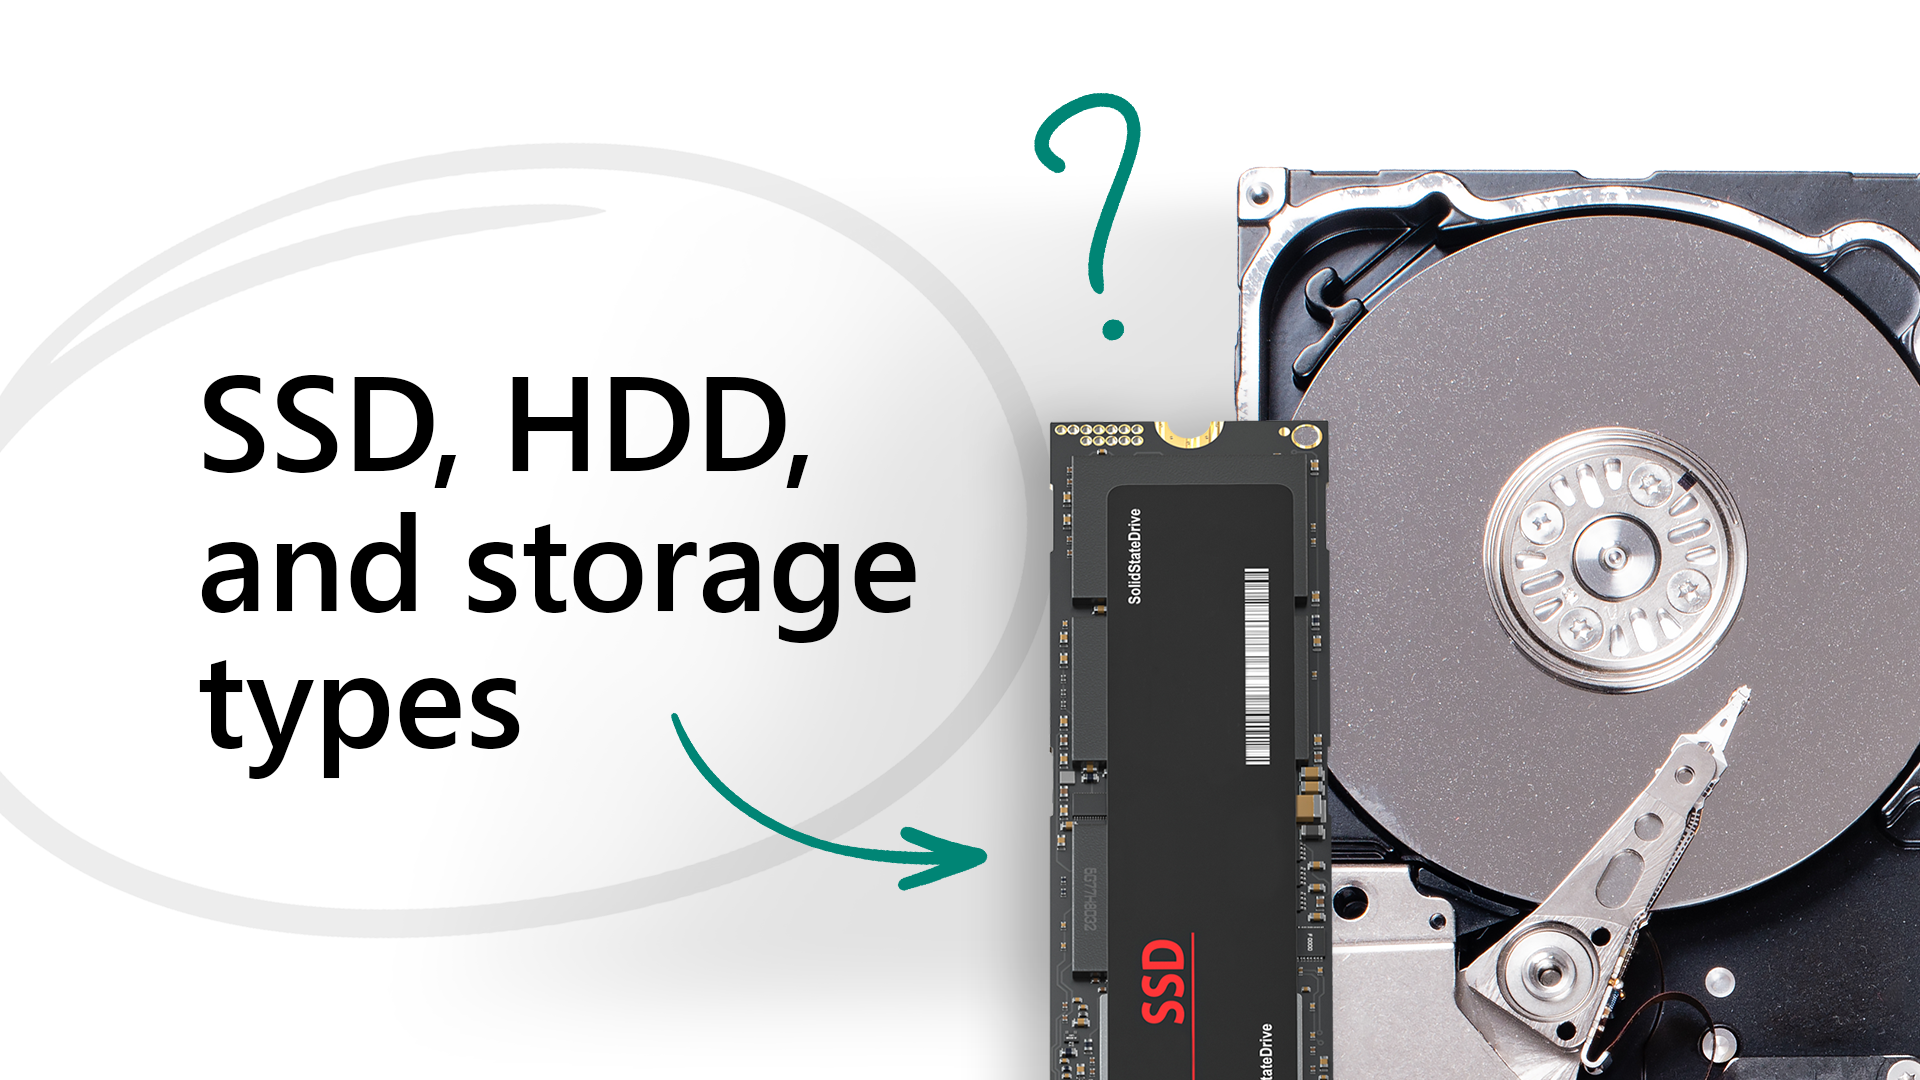 All about SSD, HDD, and storage types - Microsoft Support